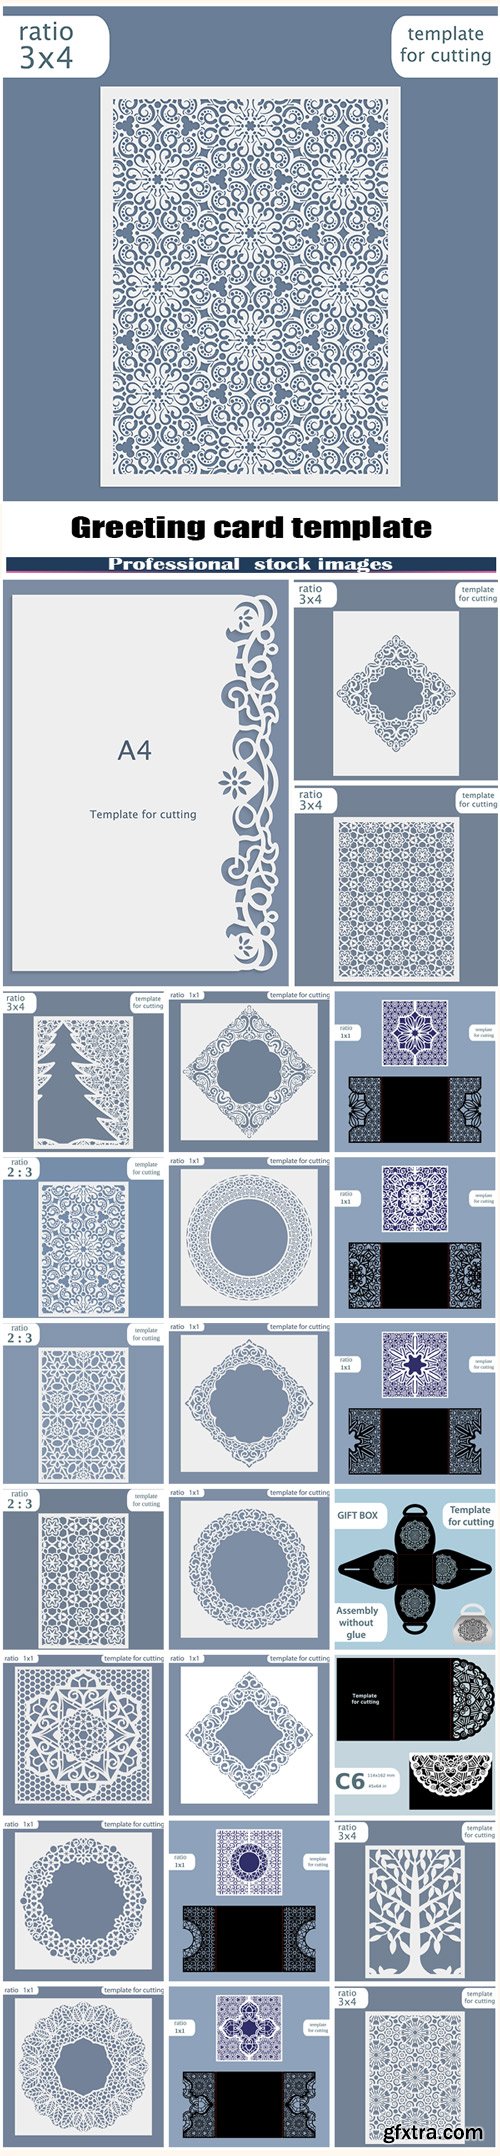 Greeting card template for cutting plotter